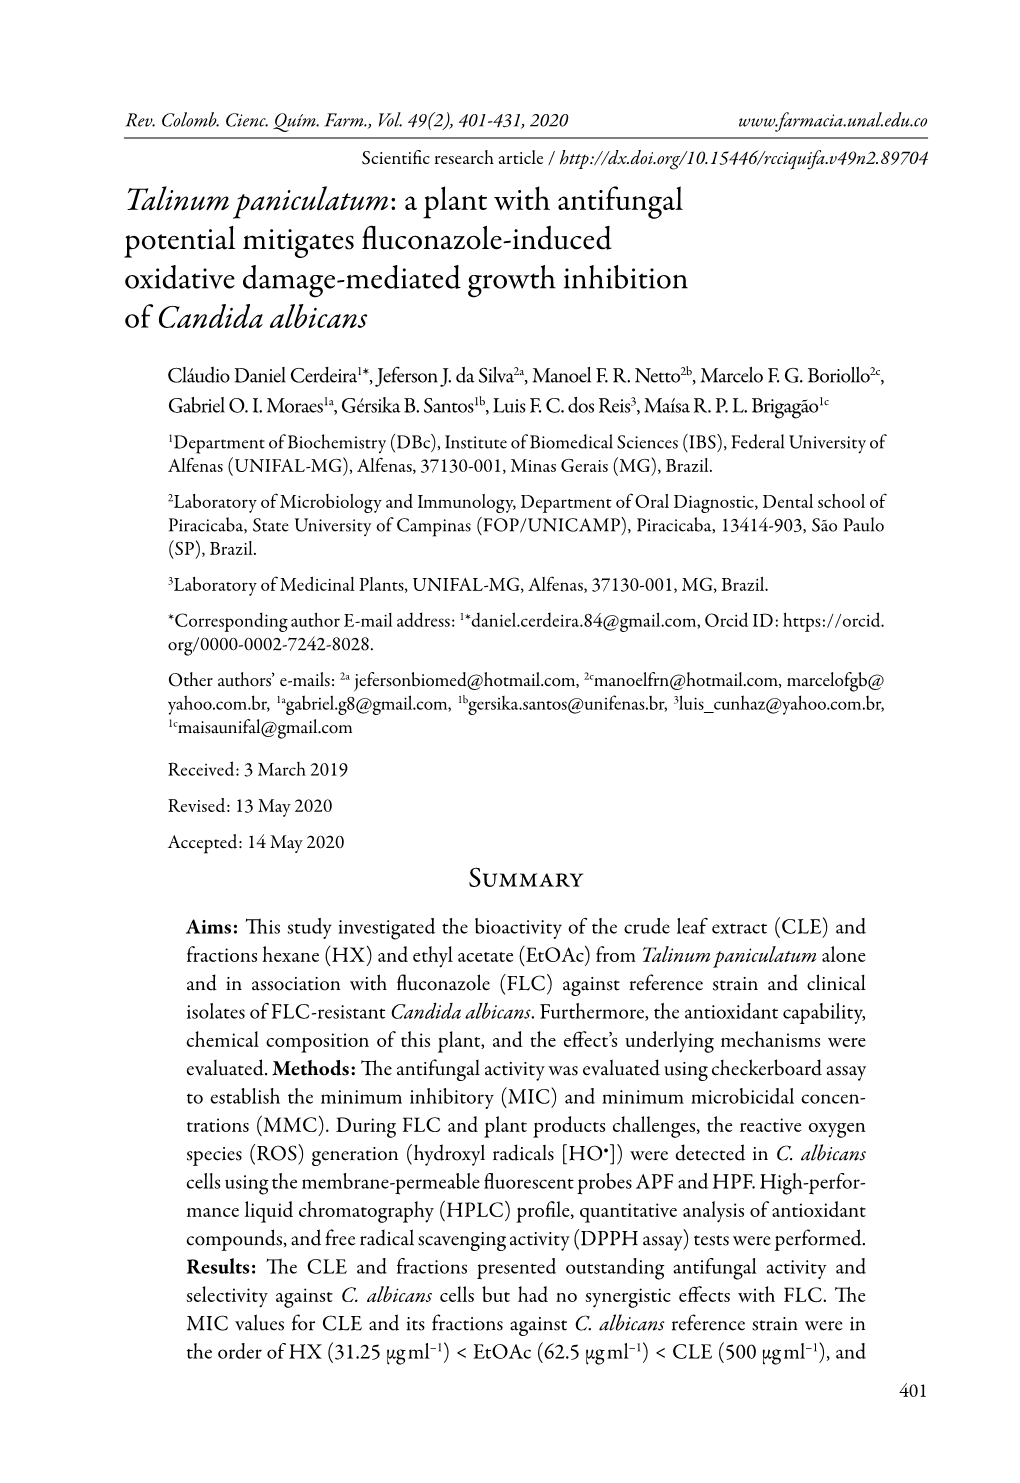 Talinum Paniculatum: a Plant with Antifungal Potential Mitigates Fluconazole-Induced Oxidative Damage-Mediated Growth Inhibition of Candida Albicans